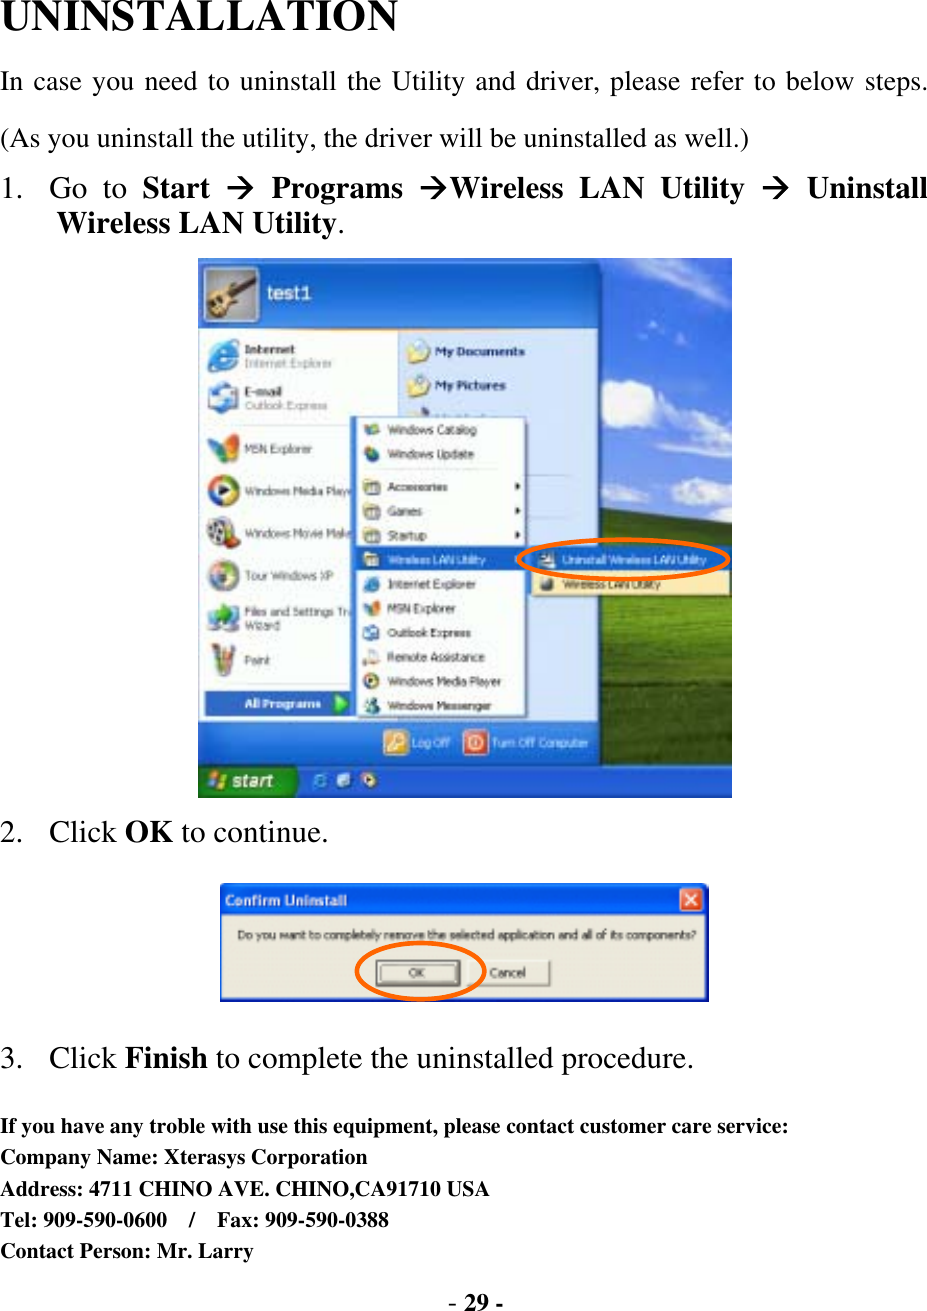  - 29 - UNINSTALLATION In case you need to uninstall the Utility and driver, please refer to below steps. (As you uninstall the utility, the driver will be uninstalled as well.) 1. Go to Start   Programs Wireless LAN Utility  Uninstall Wireless LAN Utility.  2. Click OK to continue.  3. Click Finish to complete the uninstalled procedure.  If you have any troble with use this equipment, please contact customer care service: Company Name: Xterasys Corporation Address: 4711 CHINO AVE. CHINO,CA91710 USA Tel: 909-590-0600  /  Fax: 909-590-0388 Contact Person: Mr. Larry 